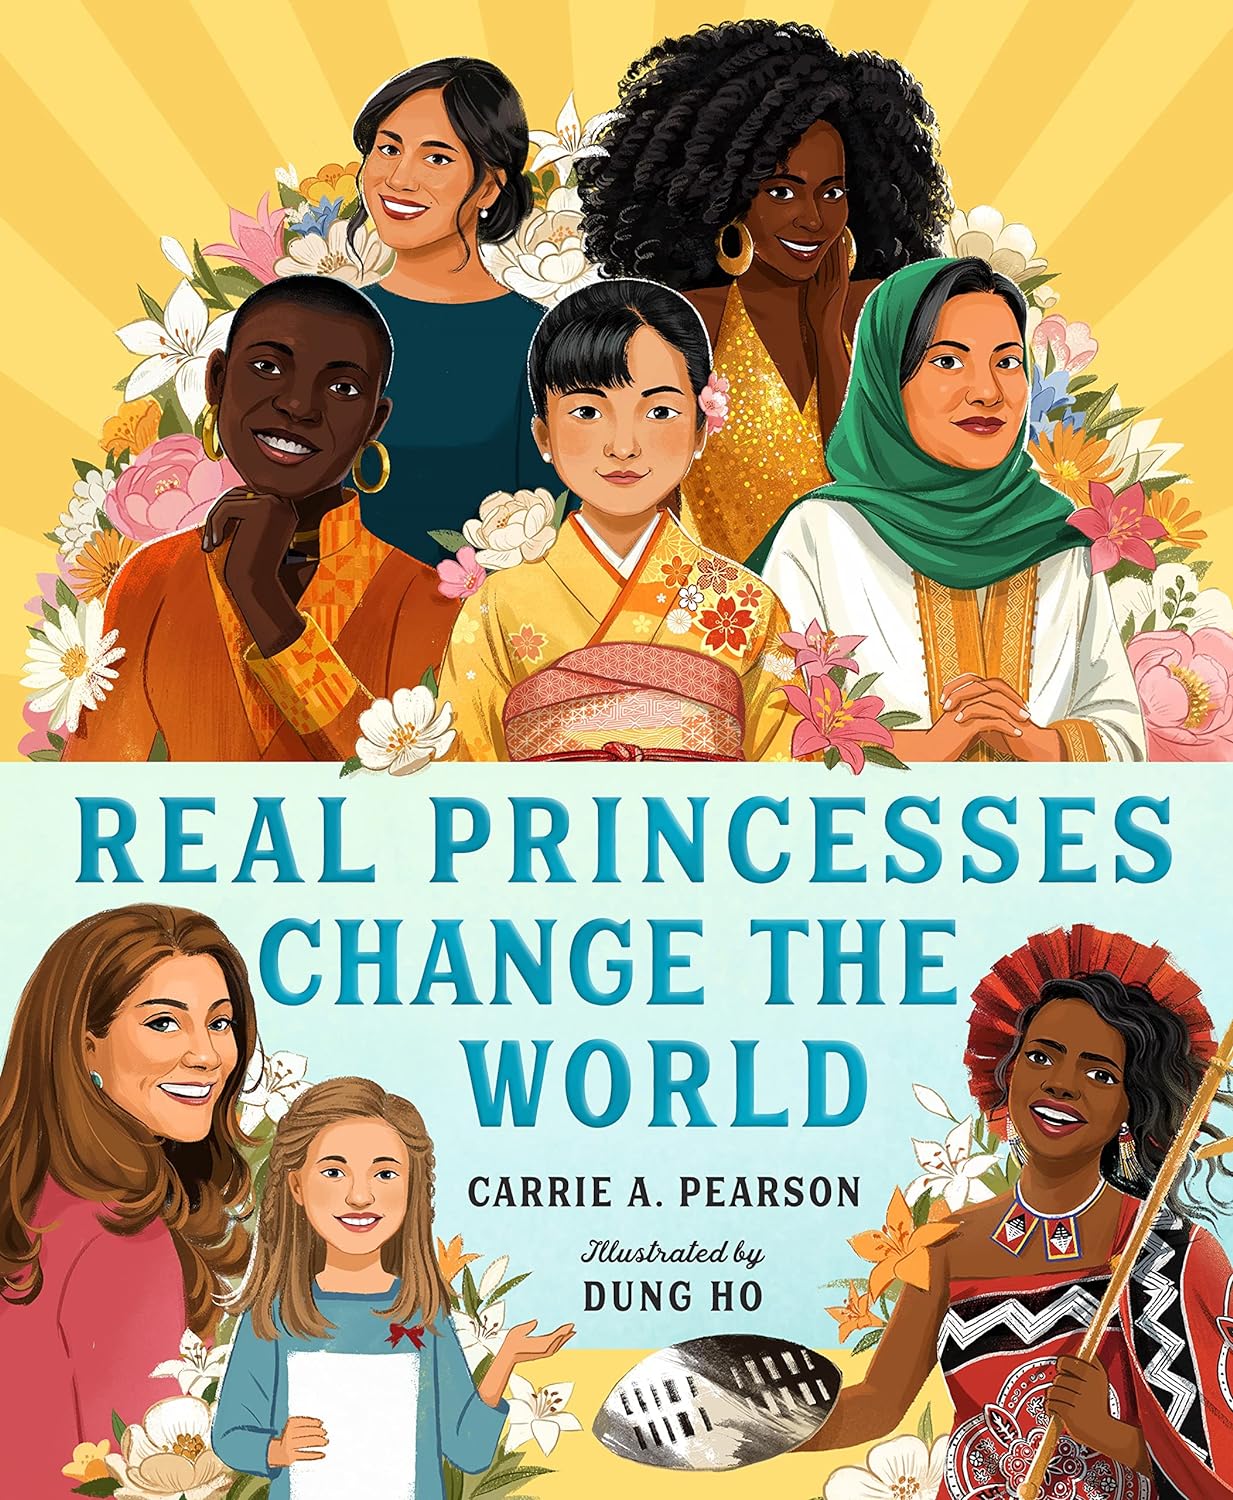 Real Princesses Change the World (Hardcover)